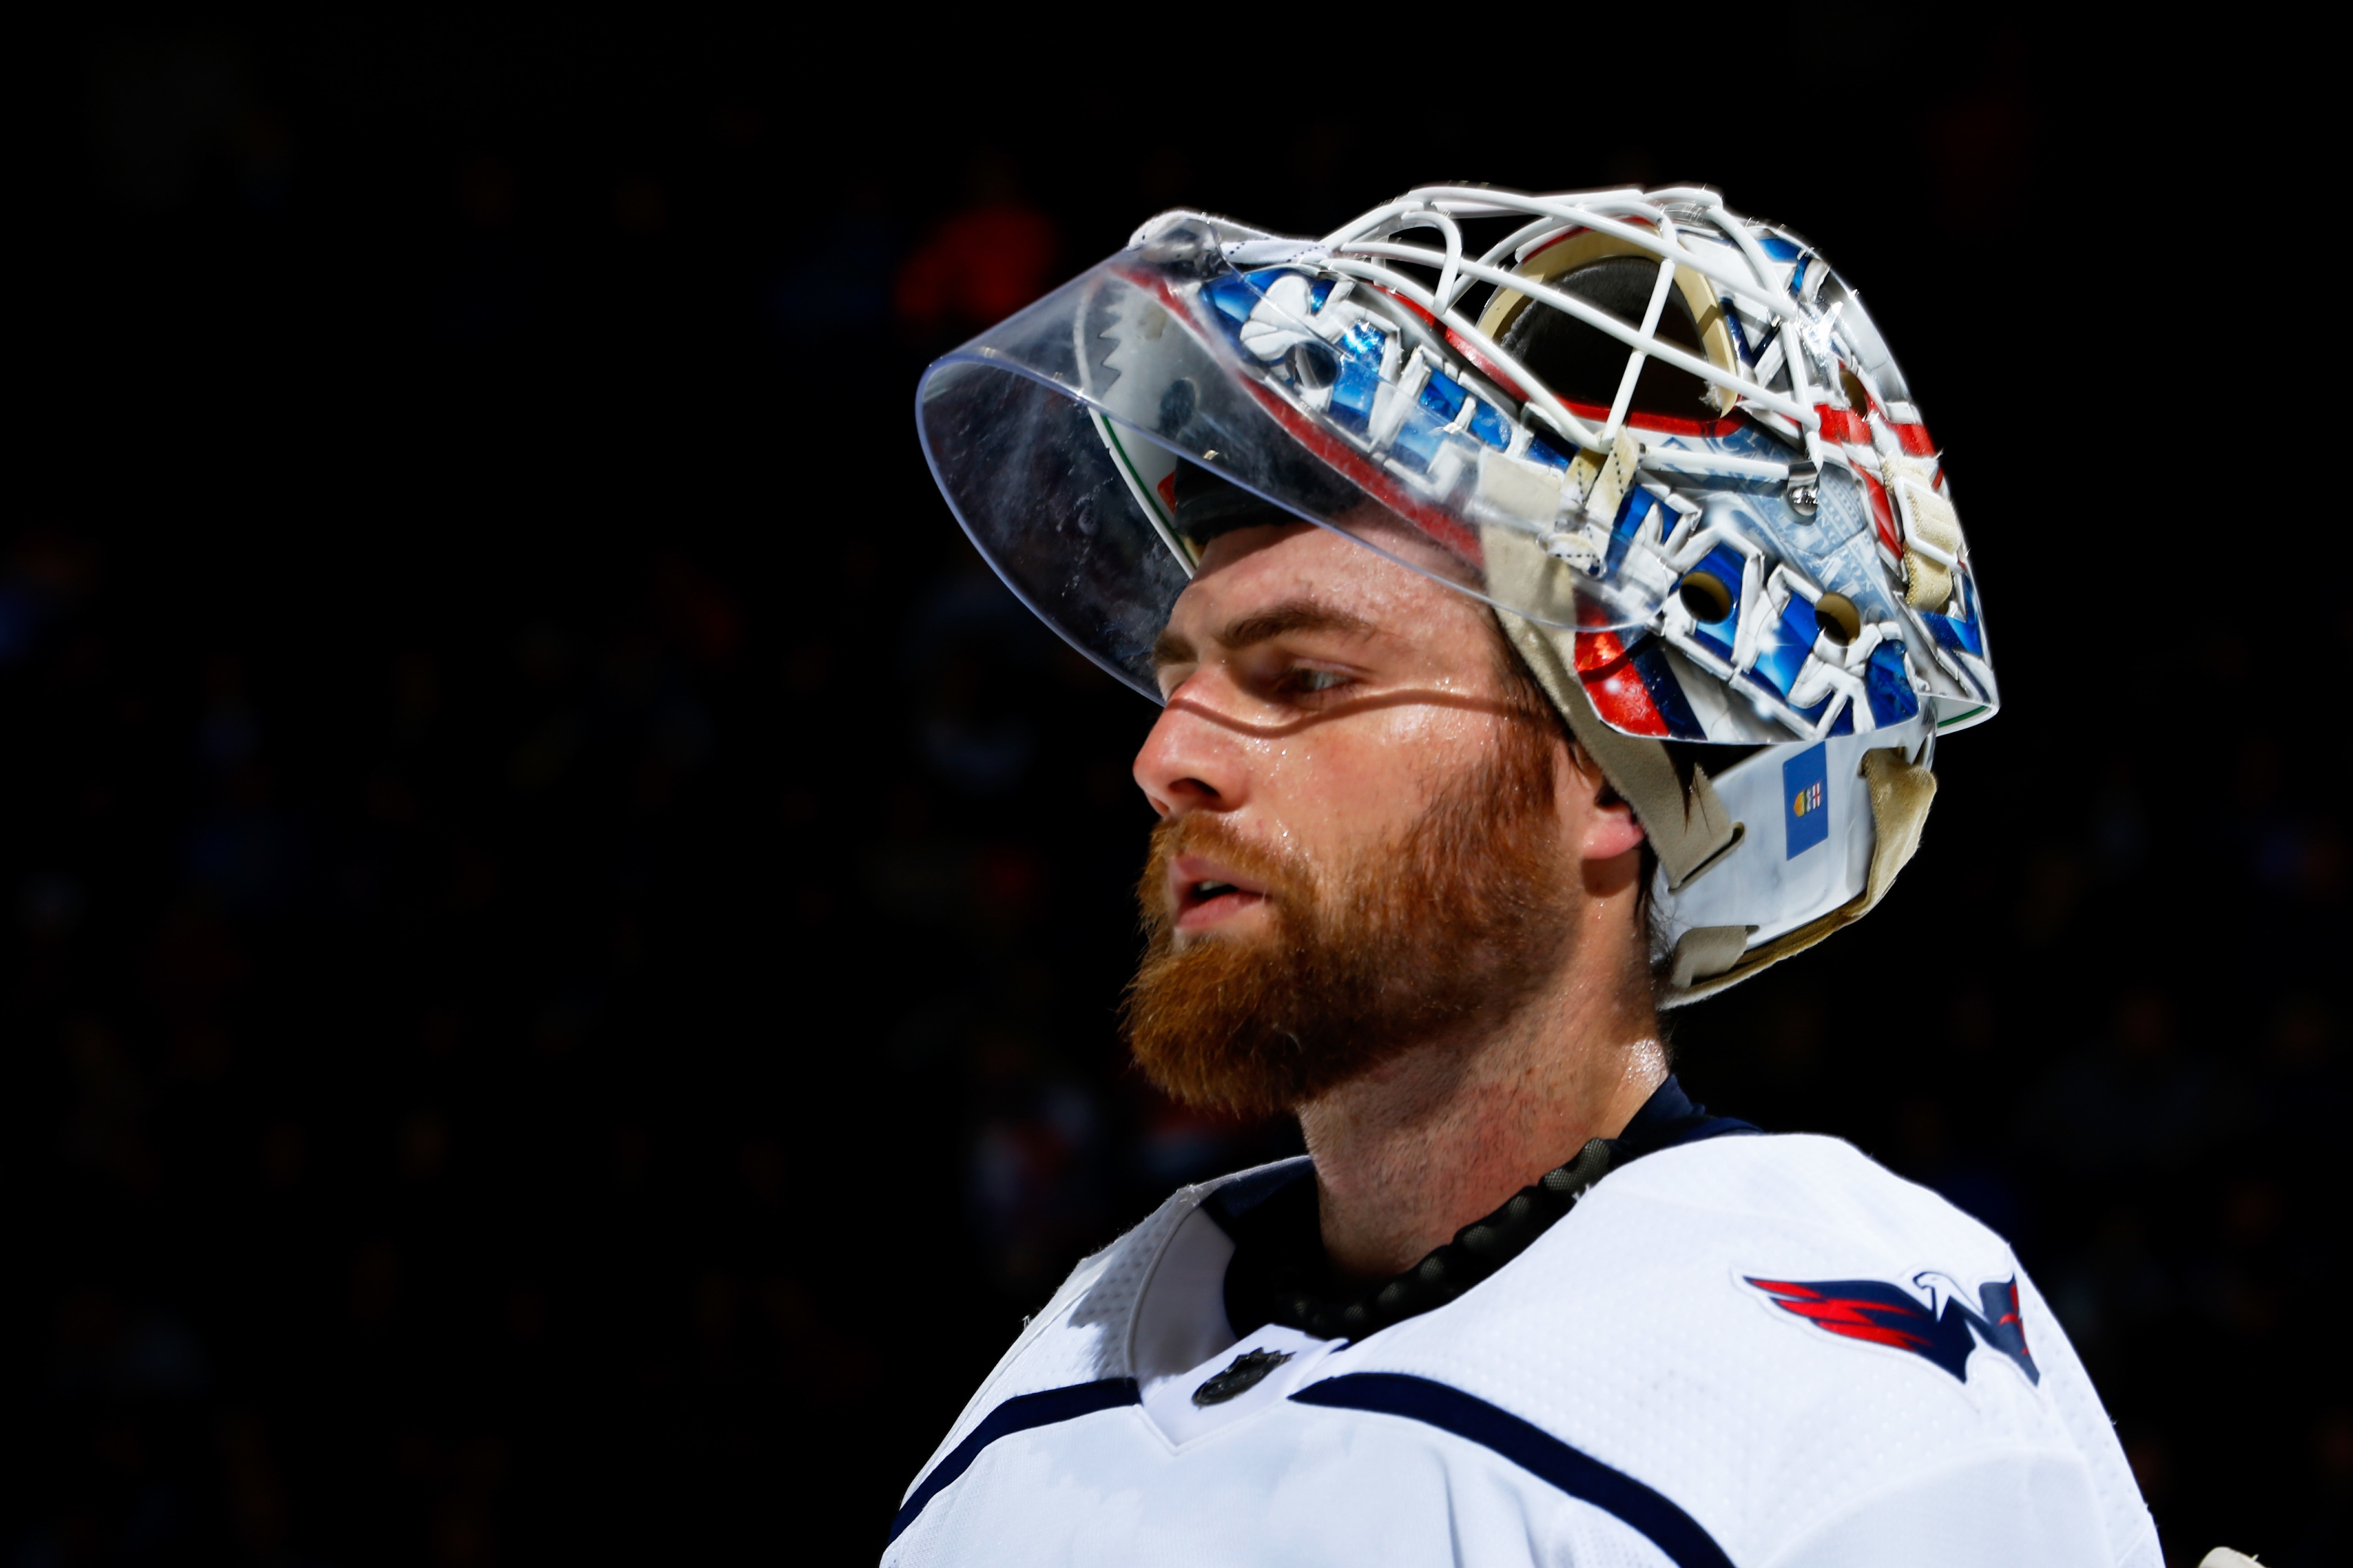 Washington Capitals: Three Stars Of The Game - Holtby The Lone